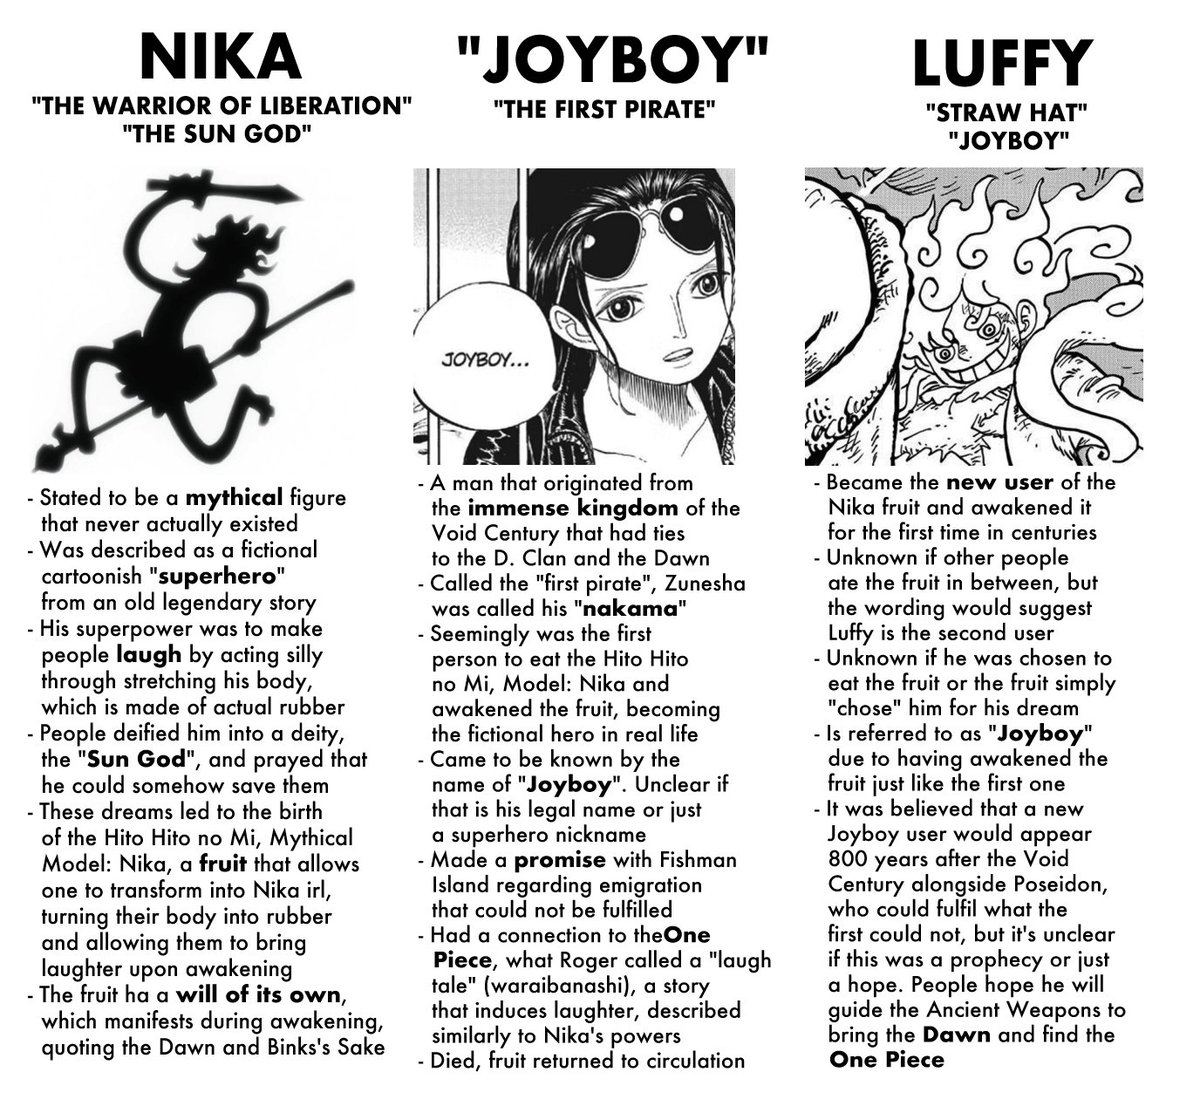 Quick cheat sheet to help distinguish the differences between Nika and 'Joyboy' #OnePiece